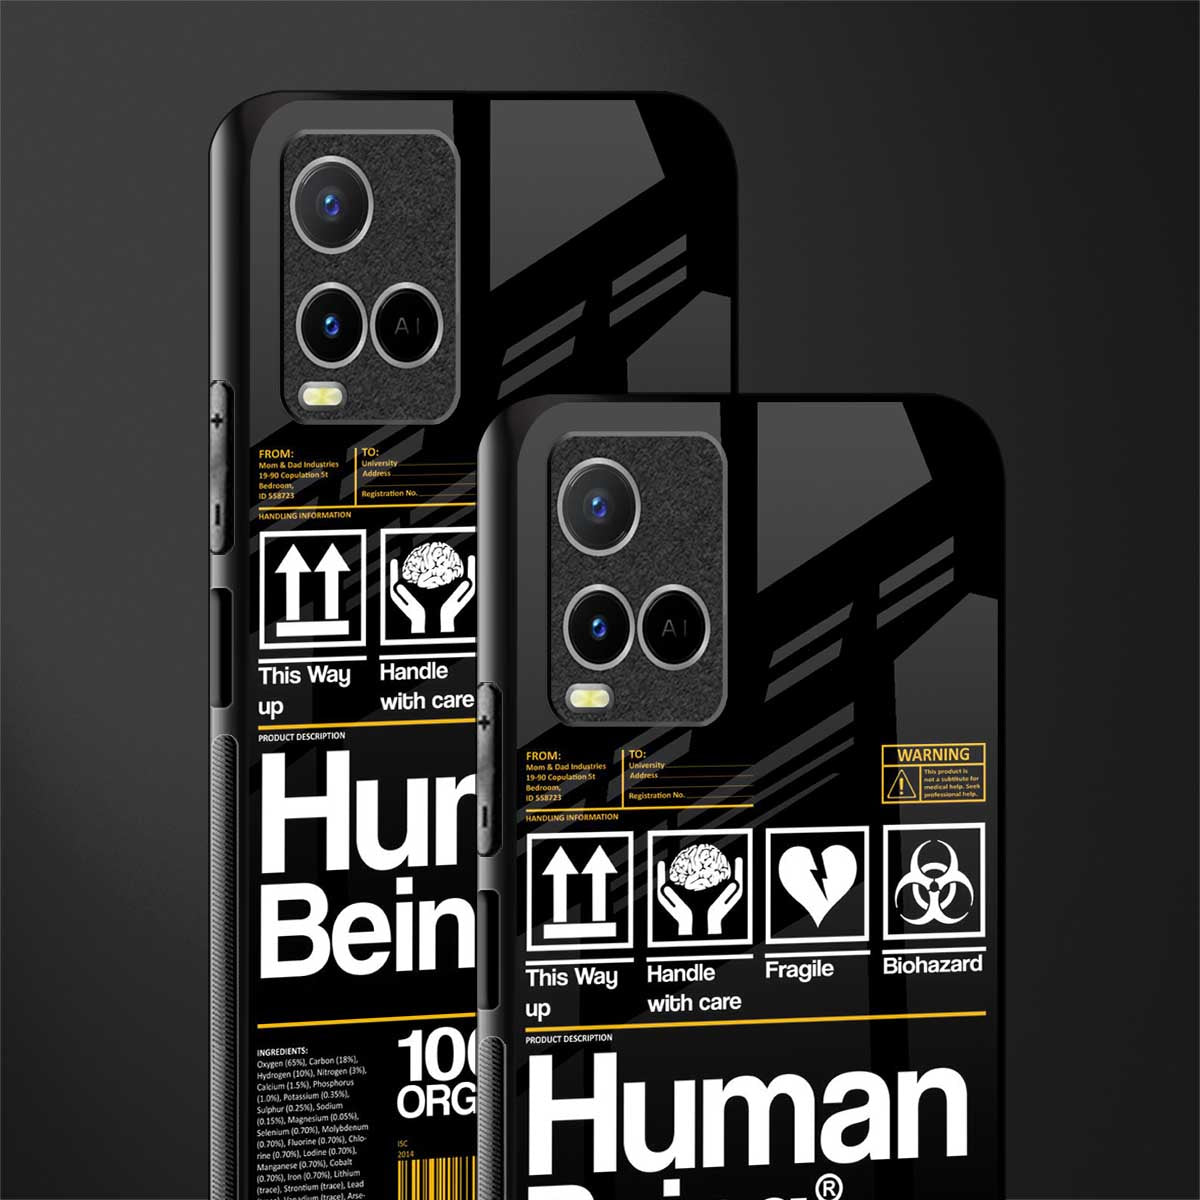 human being label phone cover for vivo y33s vivo y33t